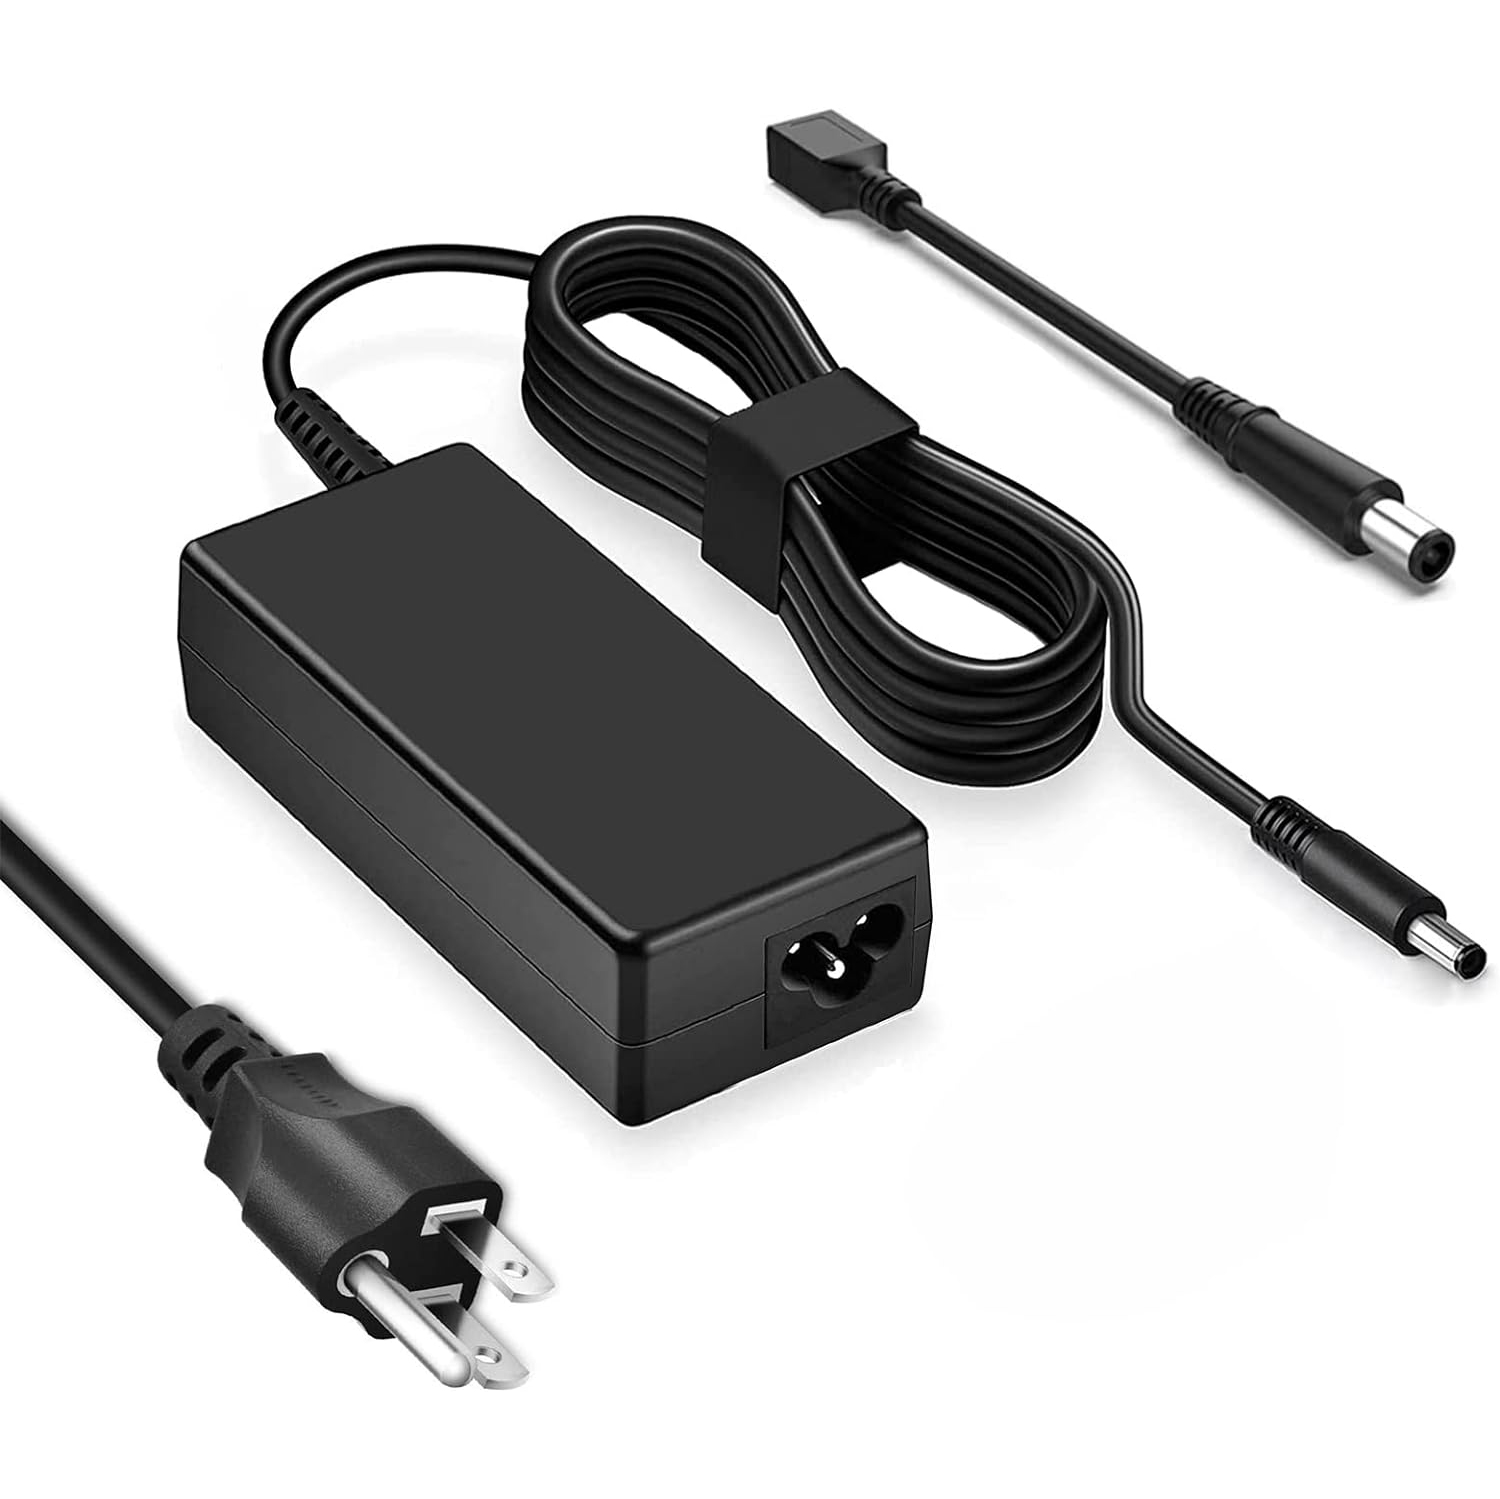 65W 45W Laptop Charger for All Dell Inspiron 11 13 15 17 Series 15-3000 15-5000 15-7000 17 13-5000 13-7000 11-3000